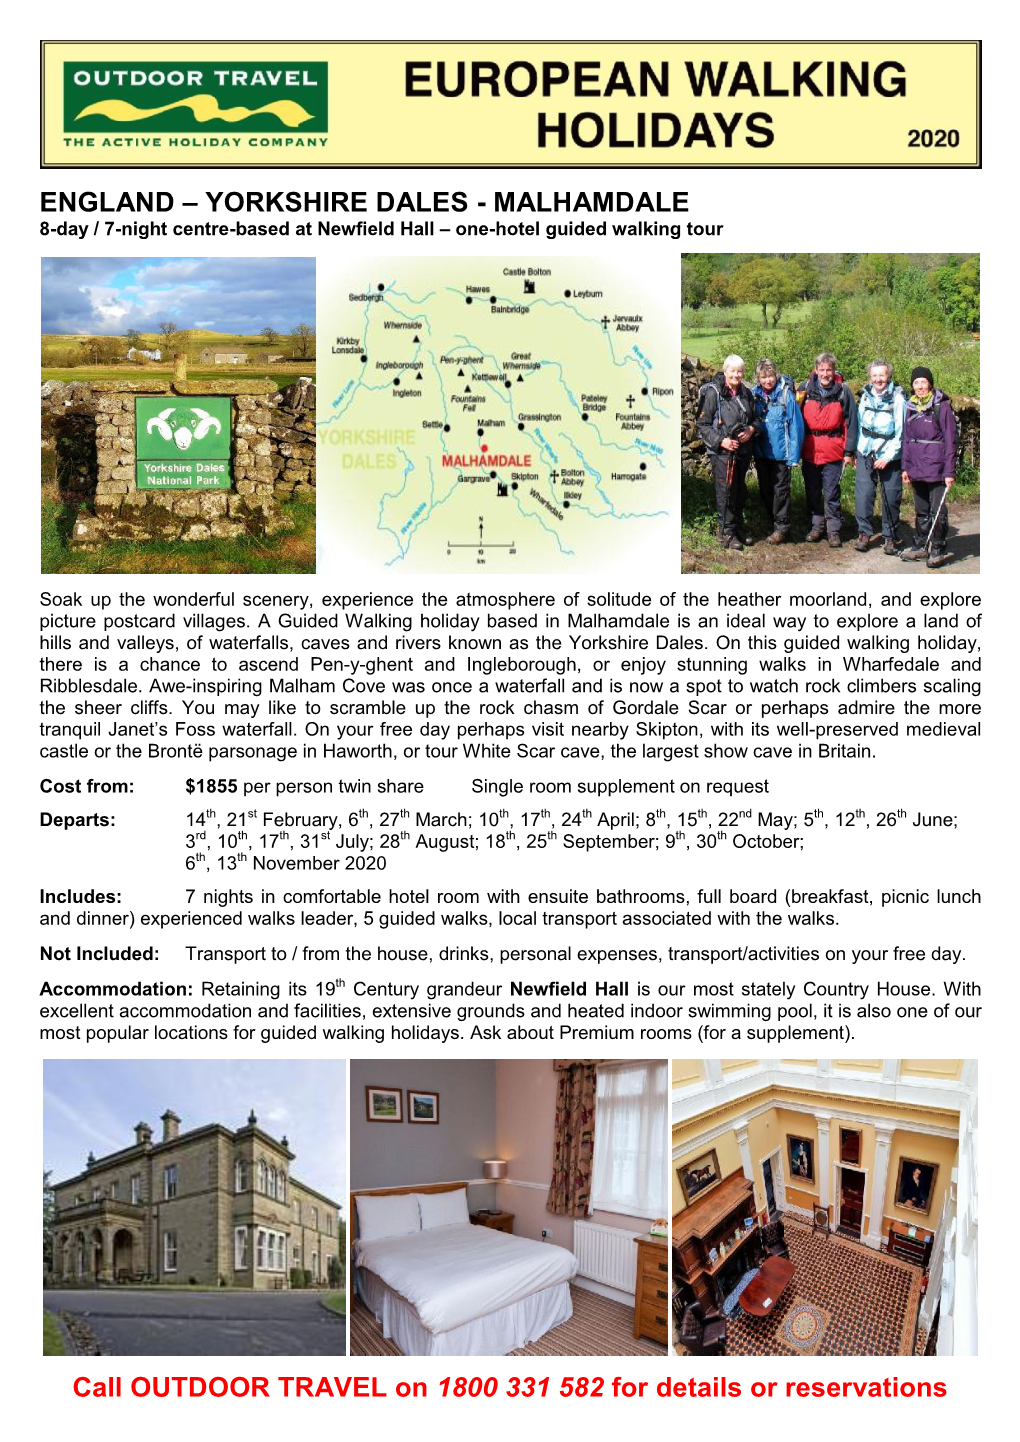 ENGLAND – YORKSHIRE DALES - MALHAMDALE 8-Day / 7-Night Centre-Based at Newfield Hall – One-Hotel Guided Walking Tour